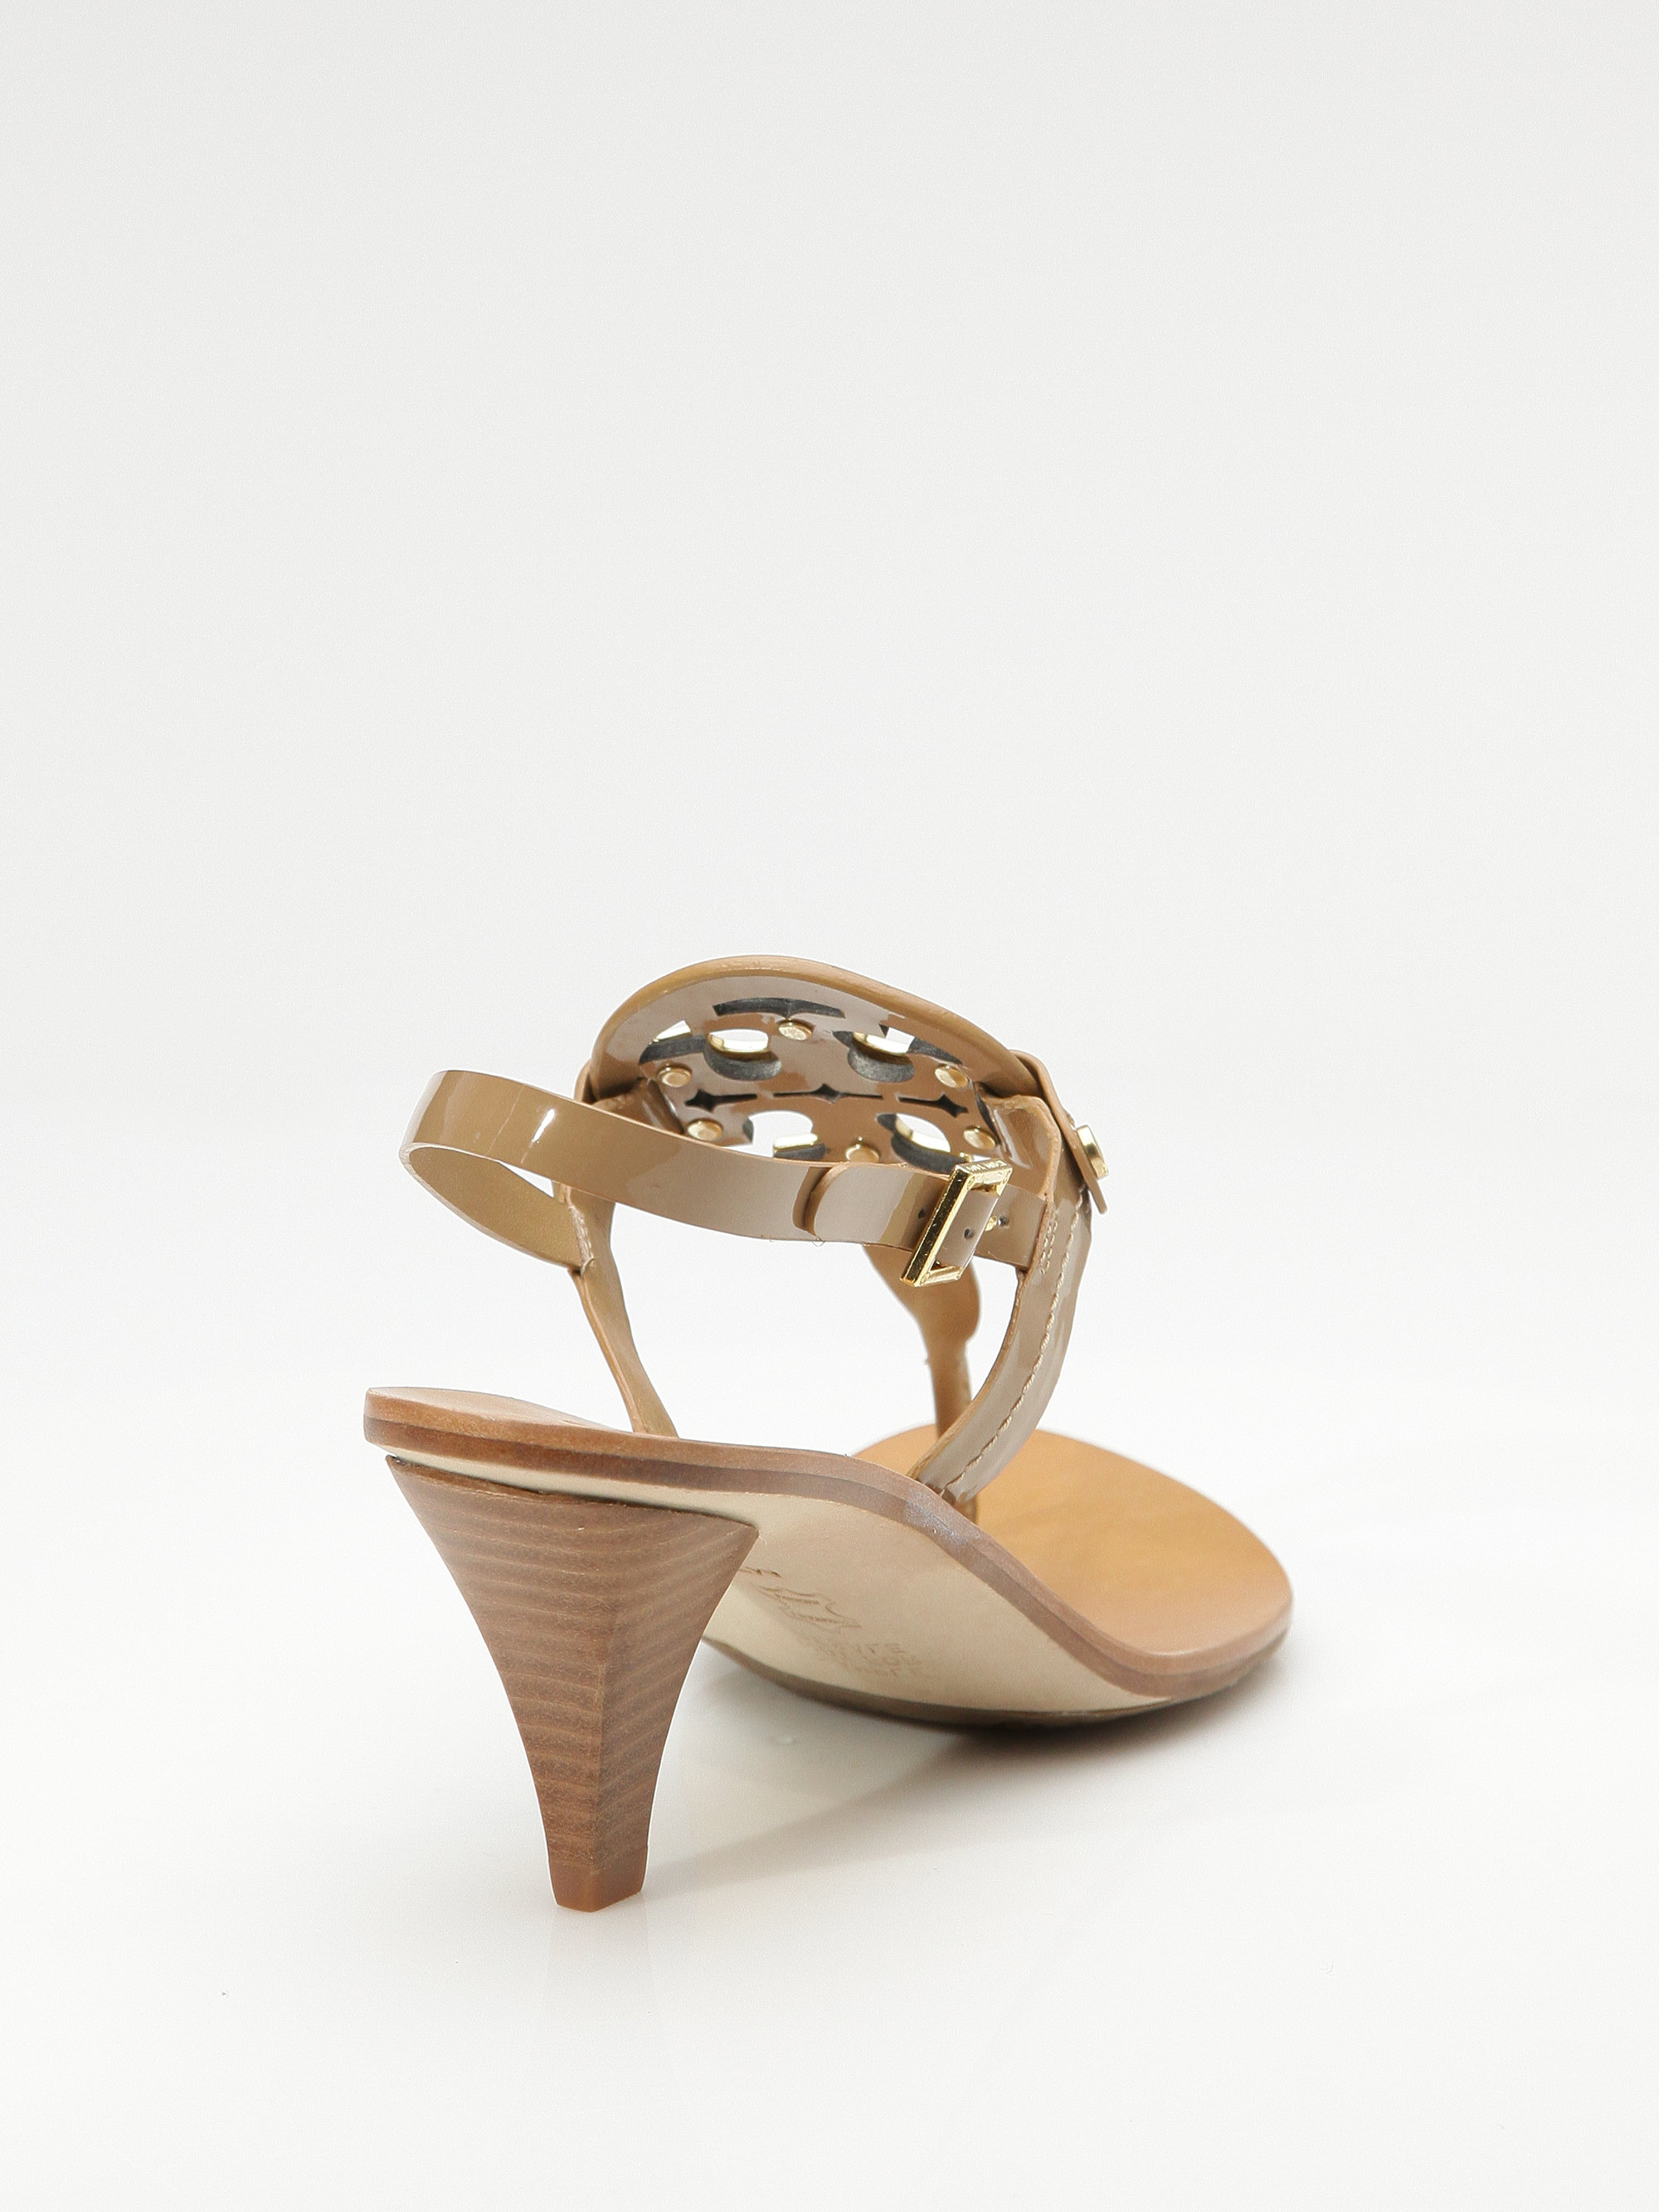 Tory Burch Holly 2 Kitten Heel Logo Patent Thong Sandals in Sand Gold  (Natural) - Lyst